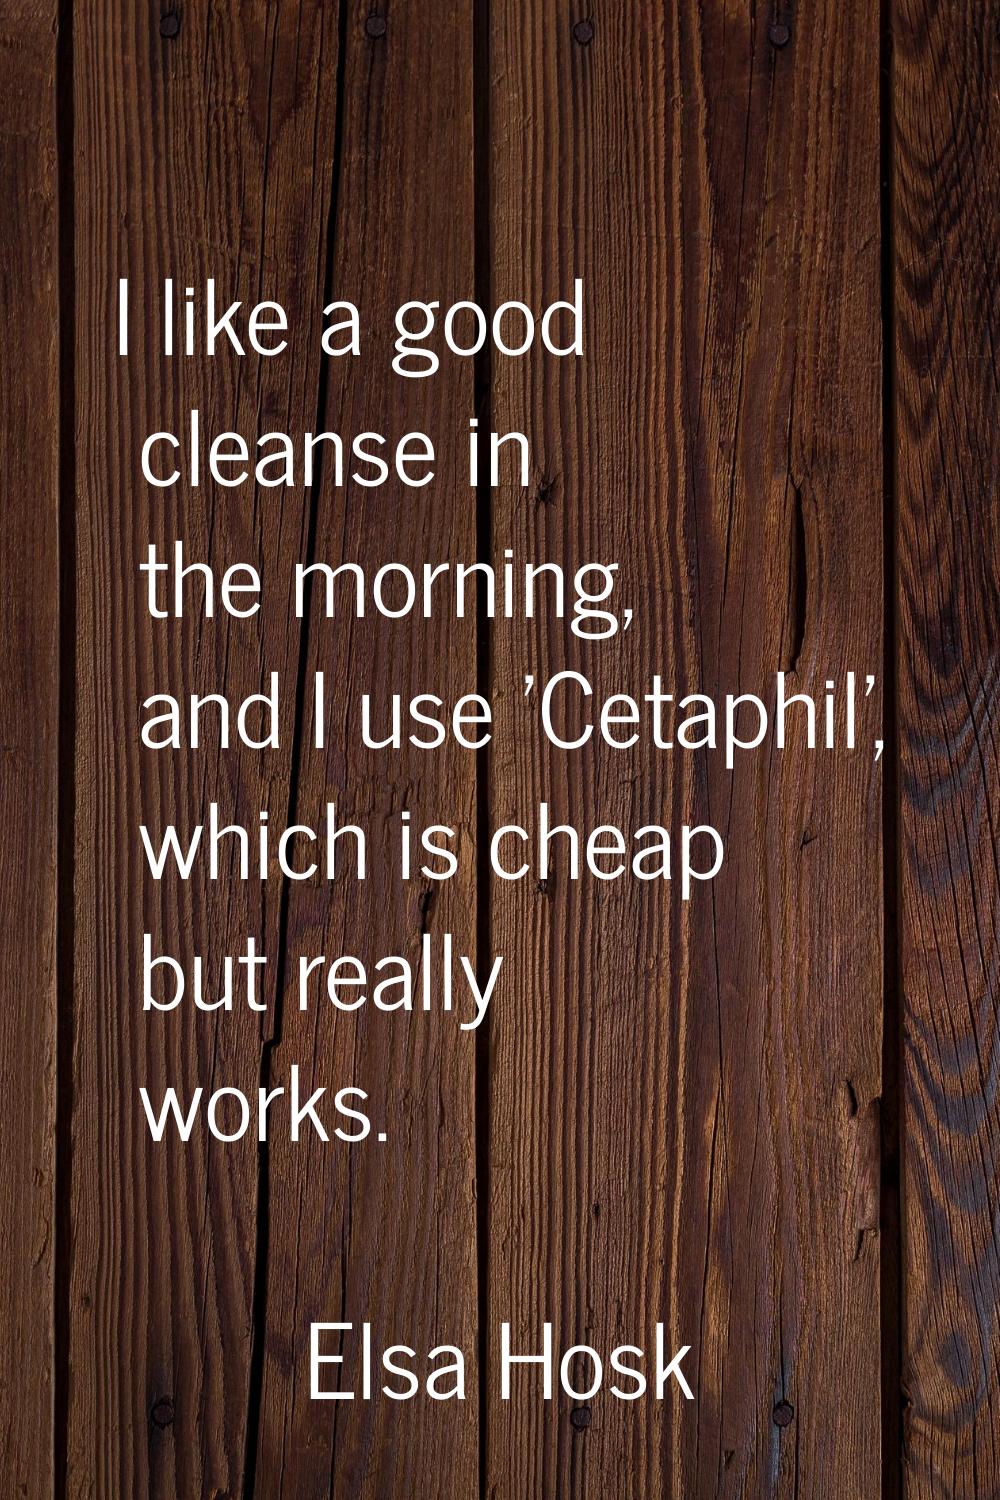 I like a good cleanse in the morning, and I use 'Cetaphil', which is cheap but really works.